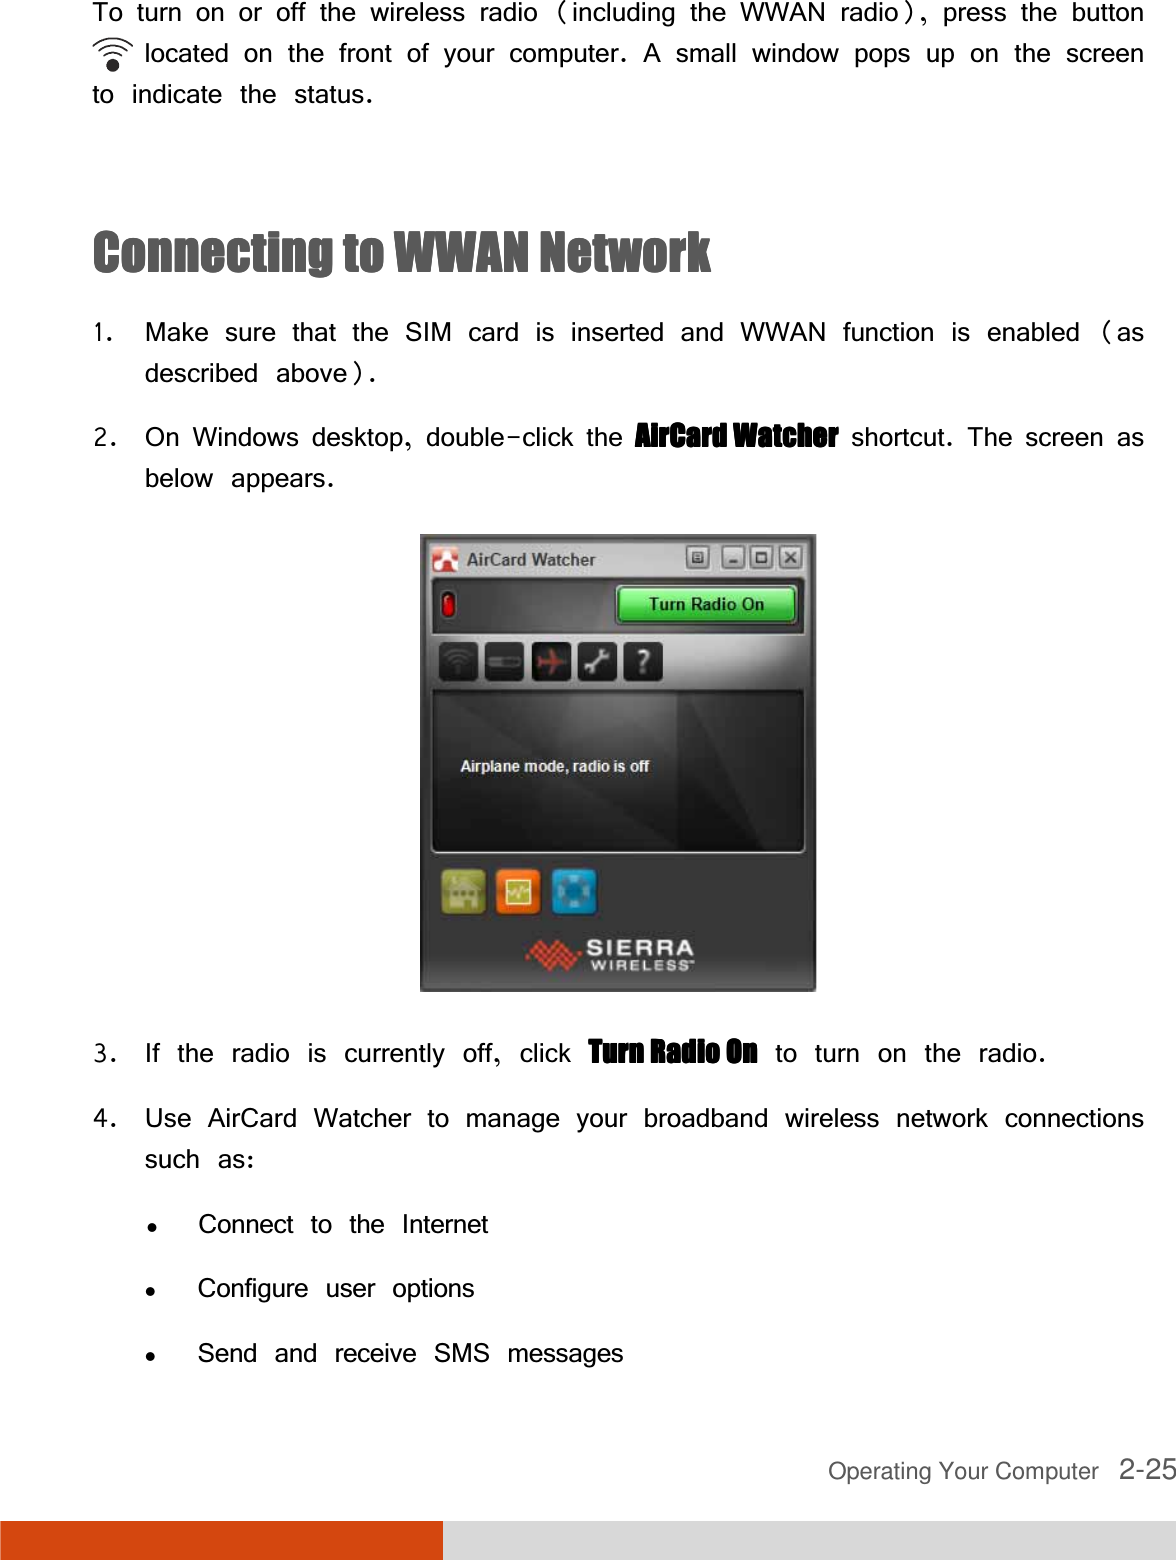 Operating Your Computer   2-25To turn on or off the wireless radio (including the WWAN radio), press the button         located on the front of your computer. A small window pops up on the screen to indicate the status.  Connecting to WWAN NetworkConnecting to WWAN NetworkConnecting to WWAN NetworkConnecting to WWAN Network    1. Make sure that the SIM card is inserted and WWAN function is enabled (as described above). 2. On Windows desktop, double-click the AirCard WatcherAirCard WatcherAirCard WatcherAirCard Watcher shortcut. The screen as below appears.  3. If the radio is currently off, click Turn Radio OnTurn Radio OnTurn Radio OnTurn Radio On to turn on the radio. 4. Use AirCard Watcher to manage your broadband wireless network connections such as: Connect to the Internet Configure user options Send and receive SMS messages 